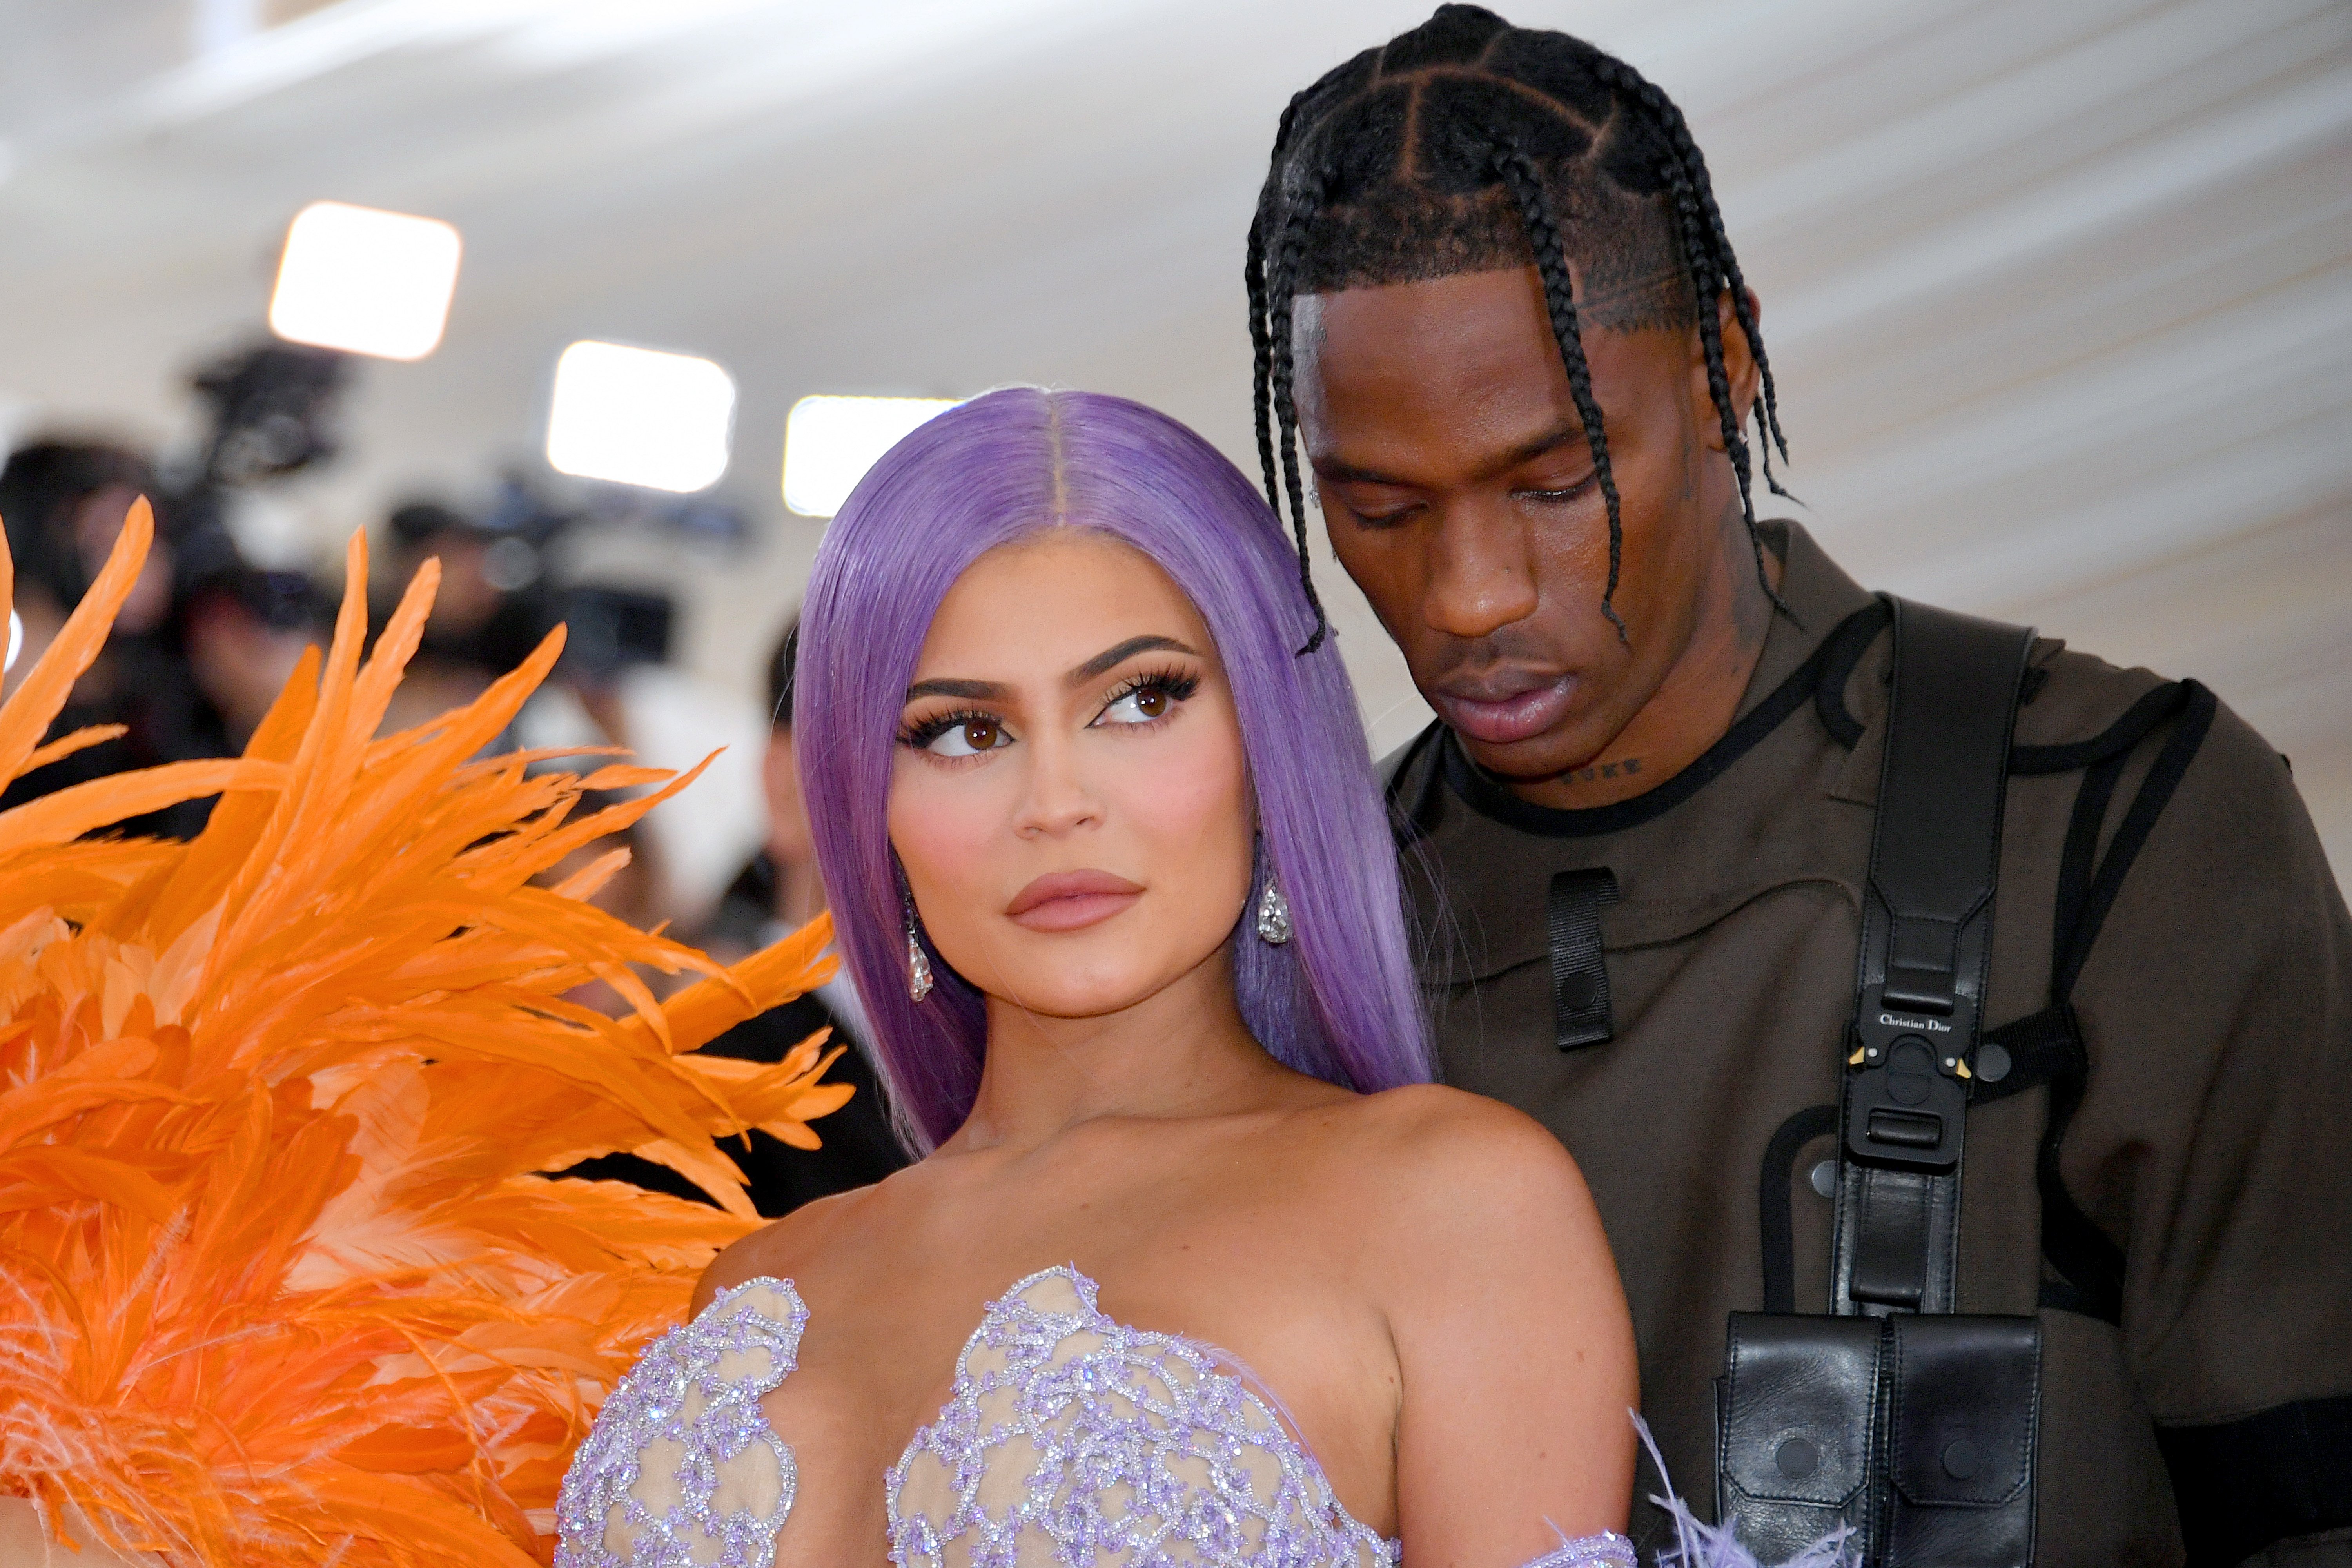 Kylie Jenner and Travis Scott at the 2019 Met Gala "Celebrating Camp: Notes on Fashion" on May 06, 2019 in New York City | Photo: Getty Images